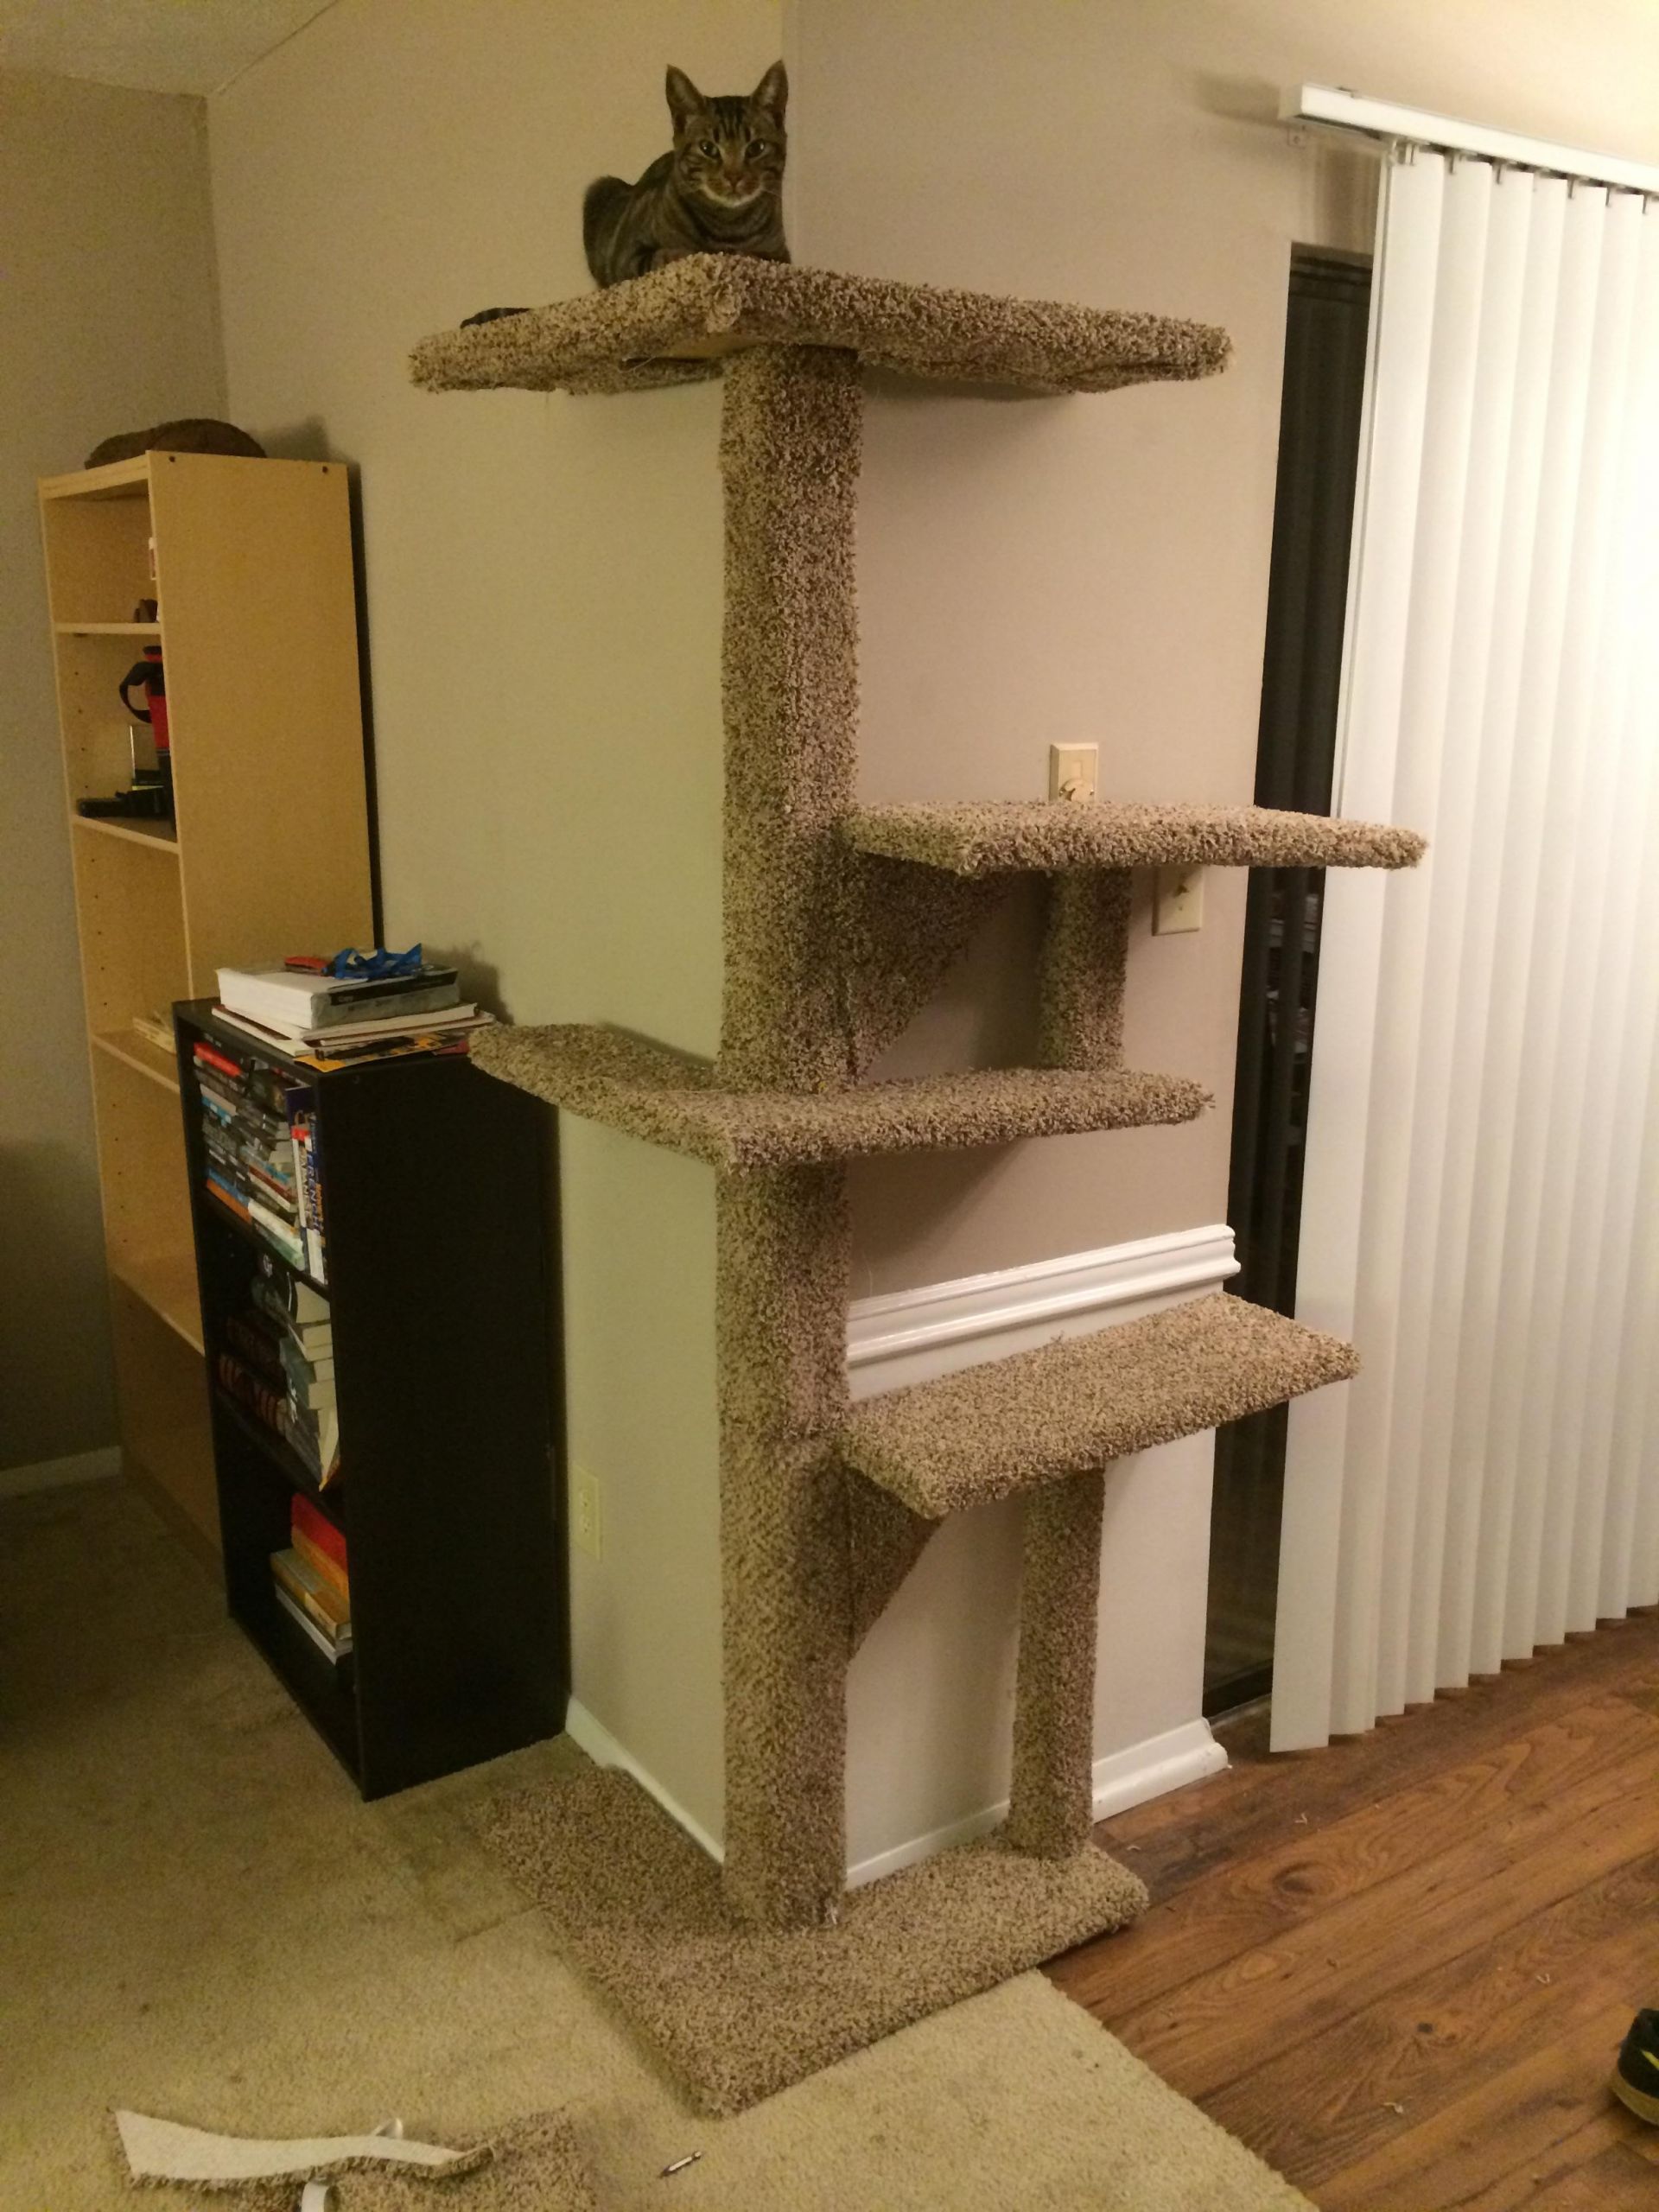 DIY Cat Condo Plans
 I built a cat tower that fits on a corner somethingimade